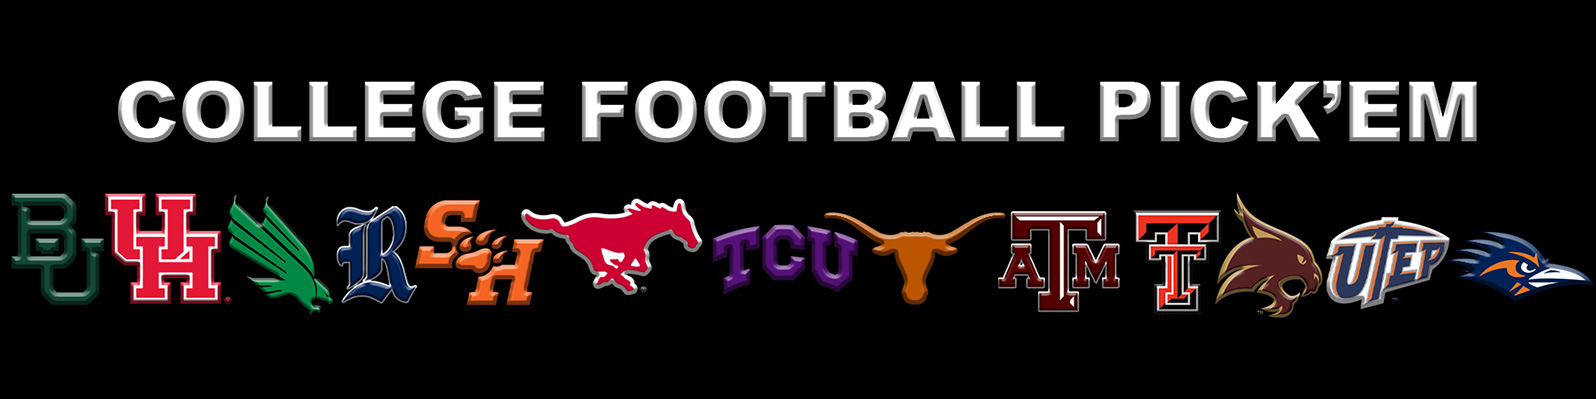 Dave Campbell's Texas Football High College Pick 'Em Contest